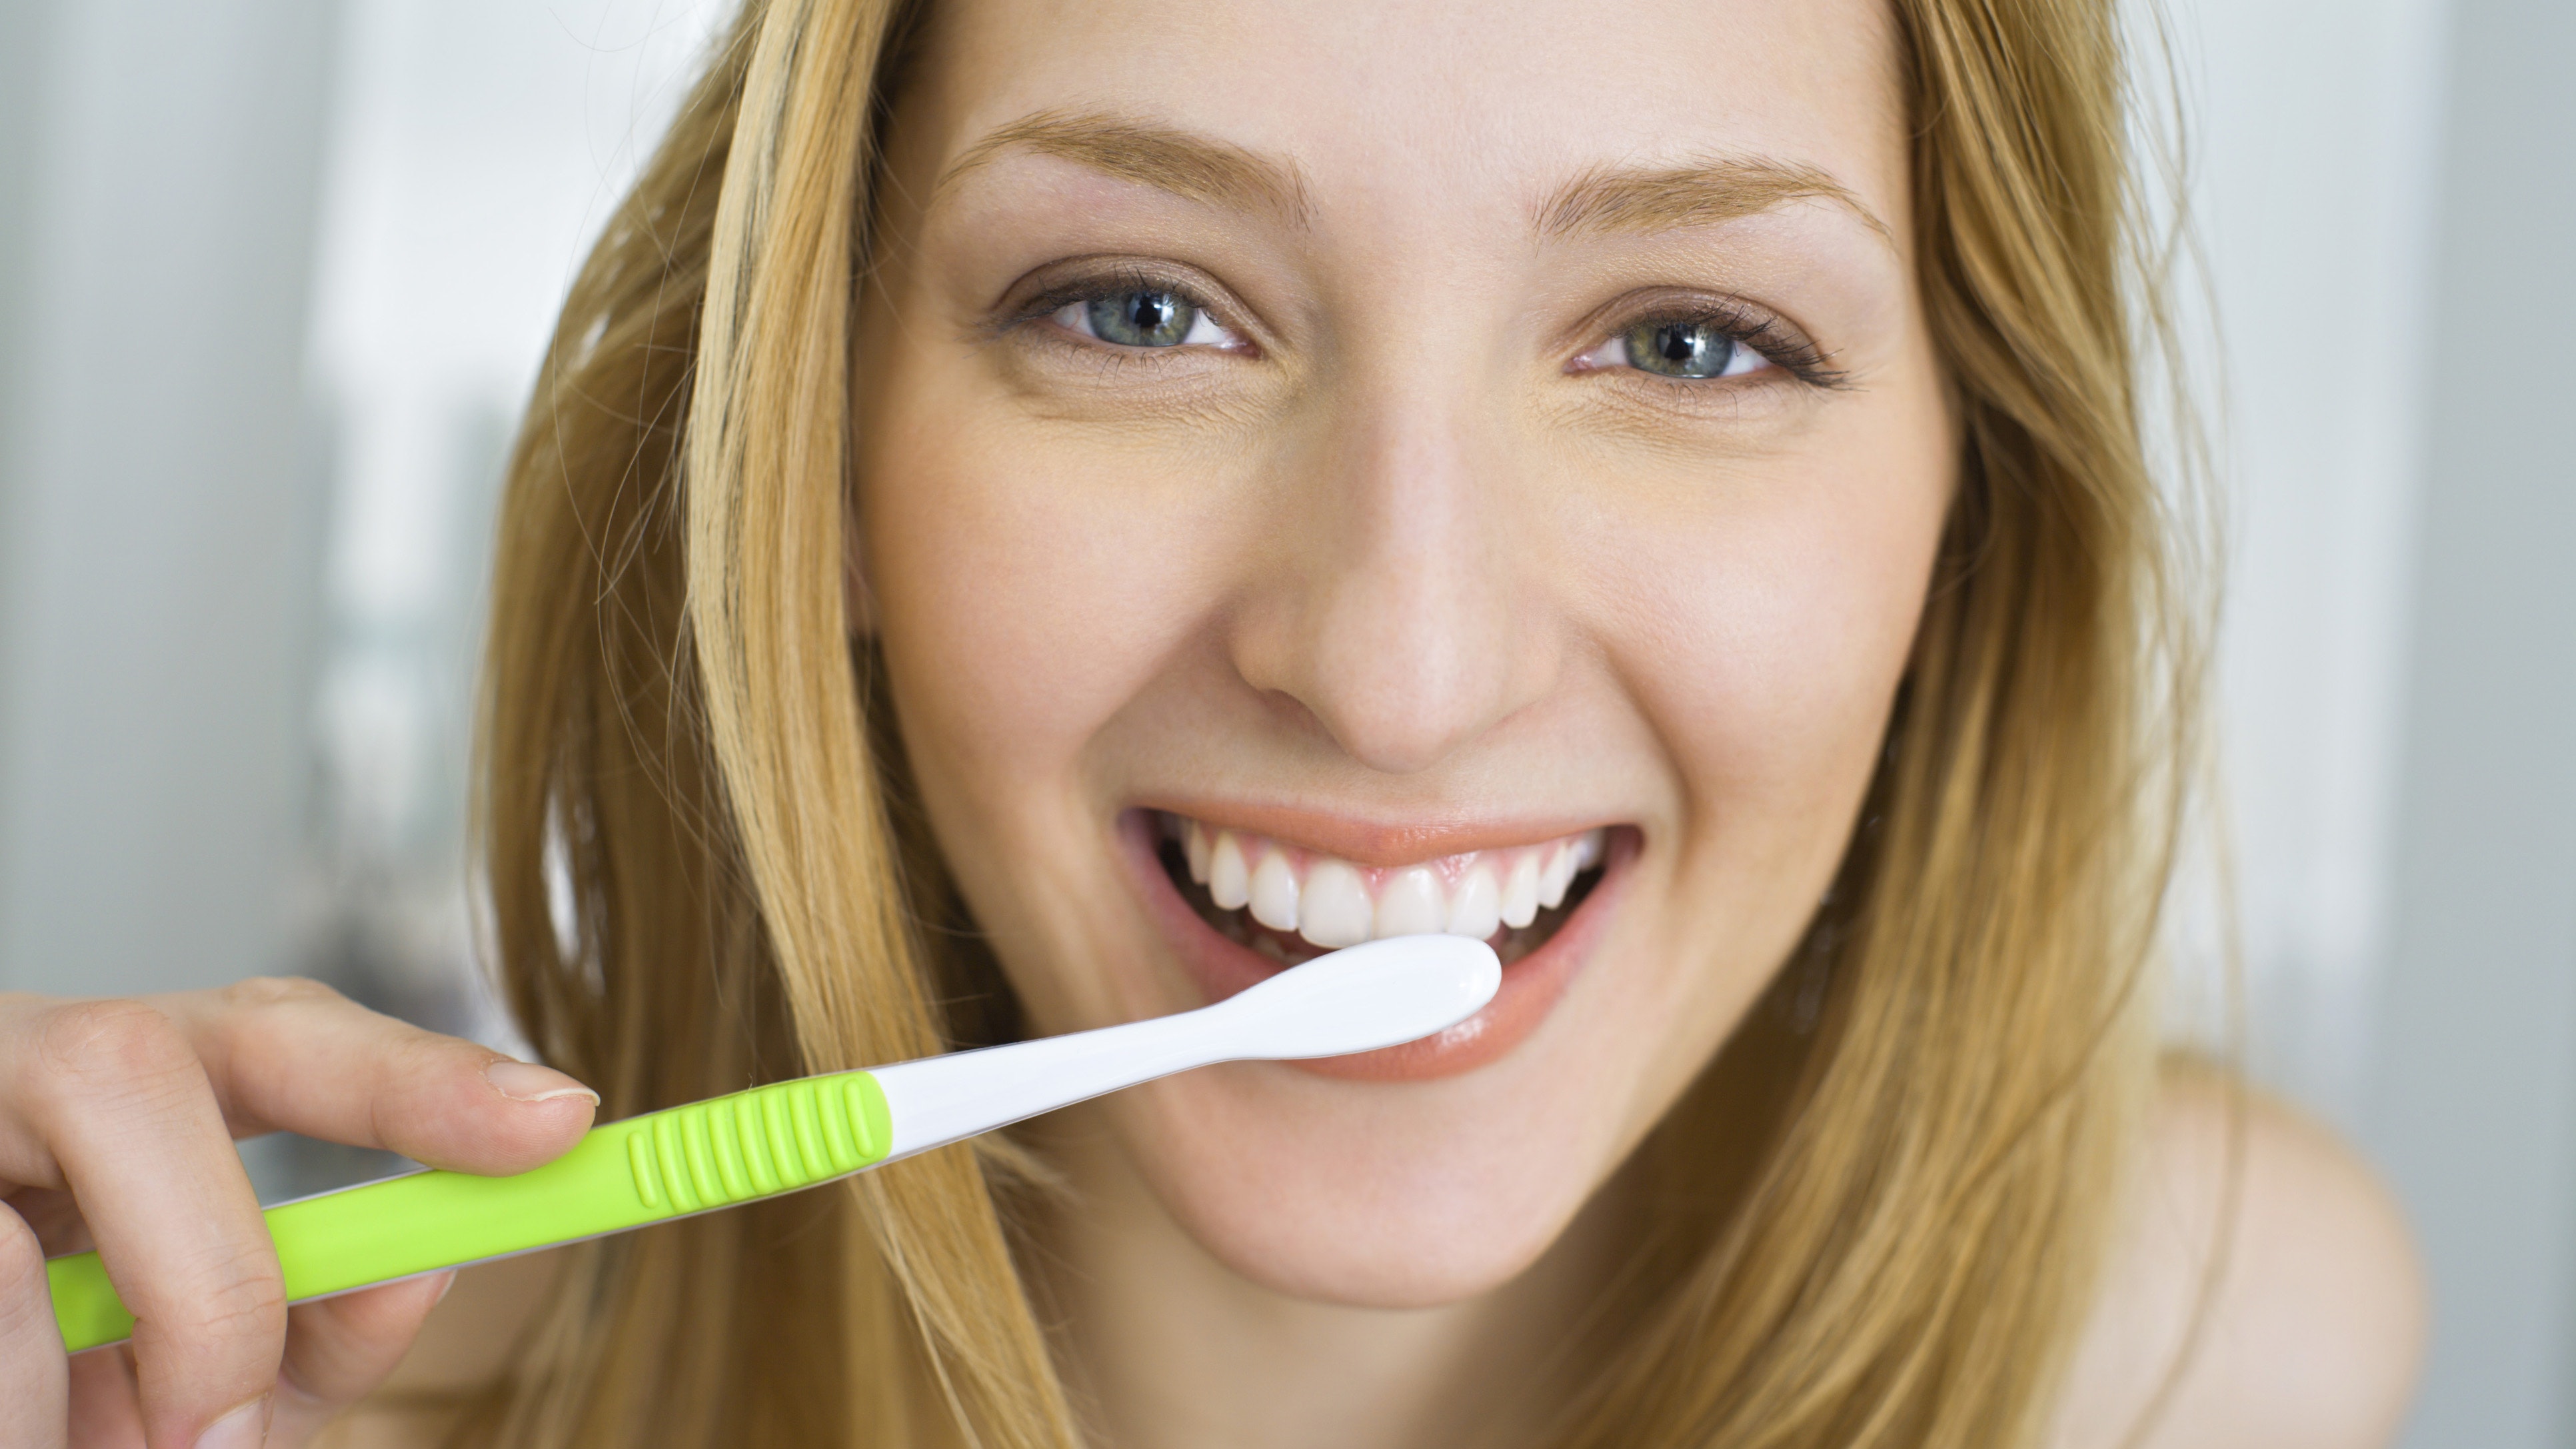 https://home.bt.com/images/world-oral-health-day-5-things-dentists-really-wish-you-knew-about-brushing-your-teeth-136425928164402601-180320081027.jpg